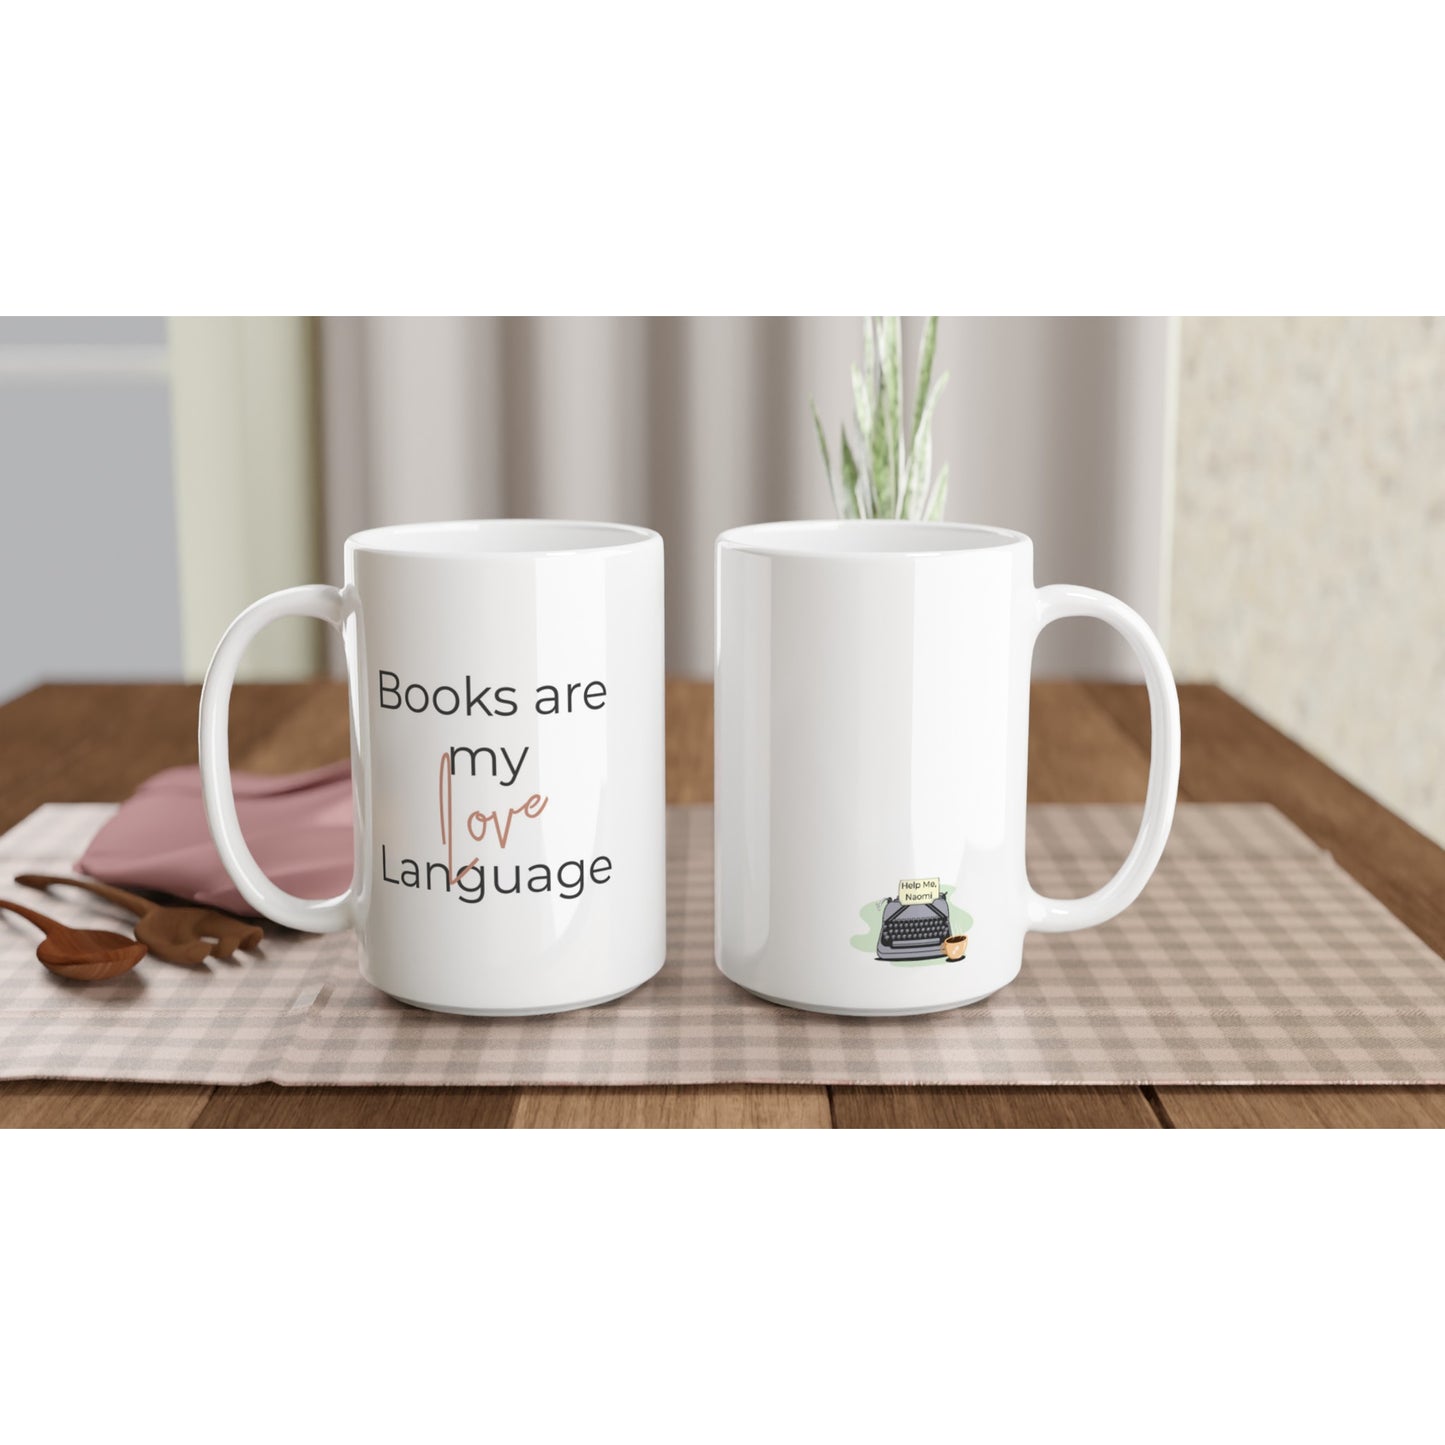 Books are my Love Language coffee mug is the perfect reading companion for book lovers.